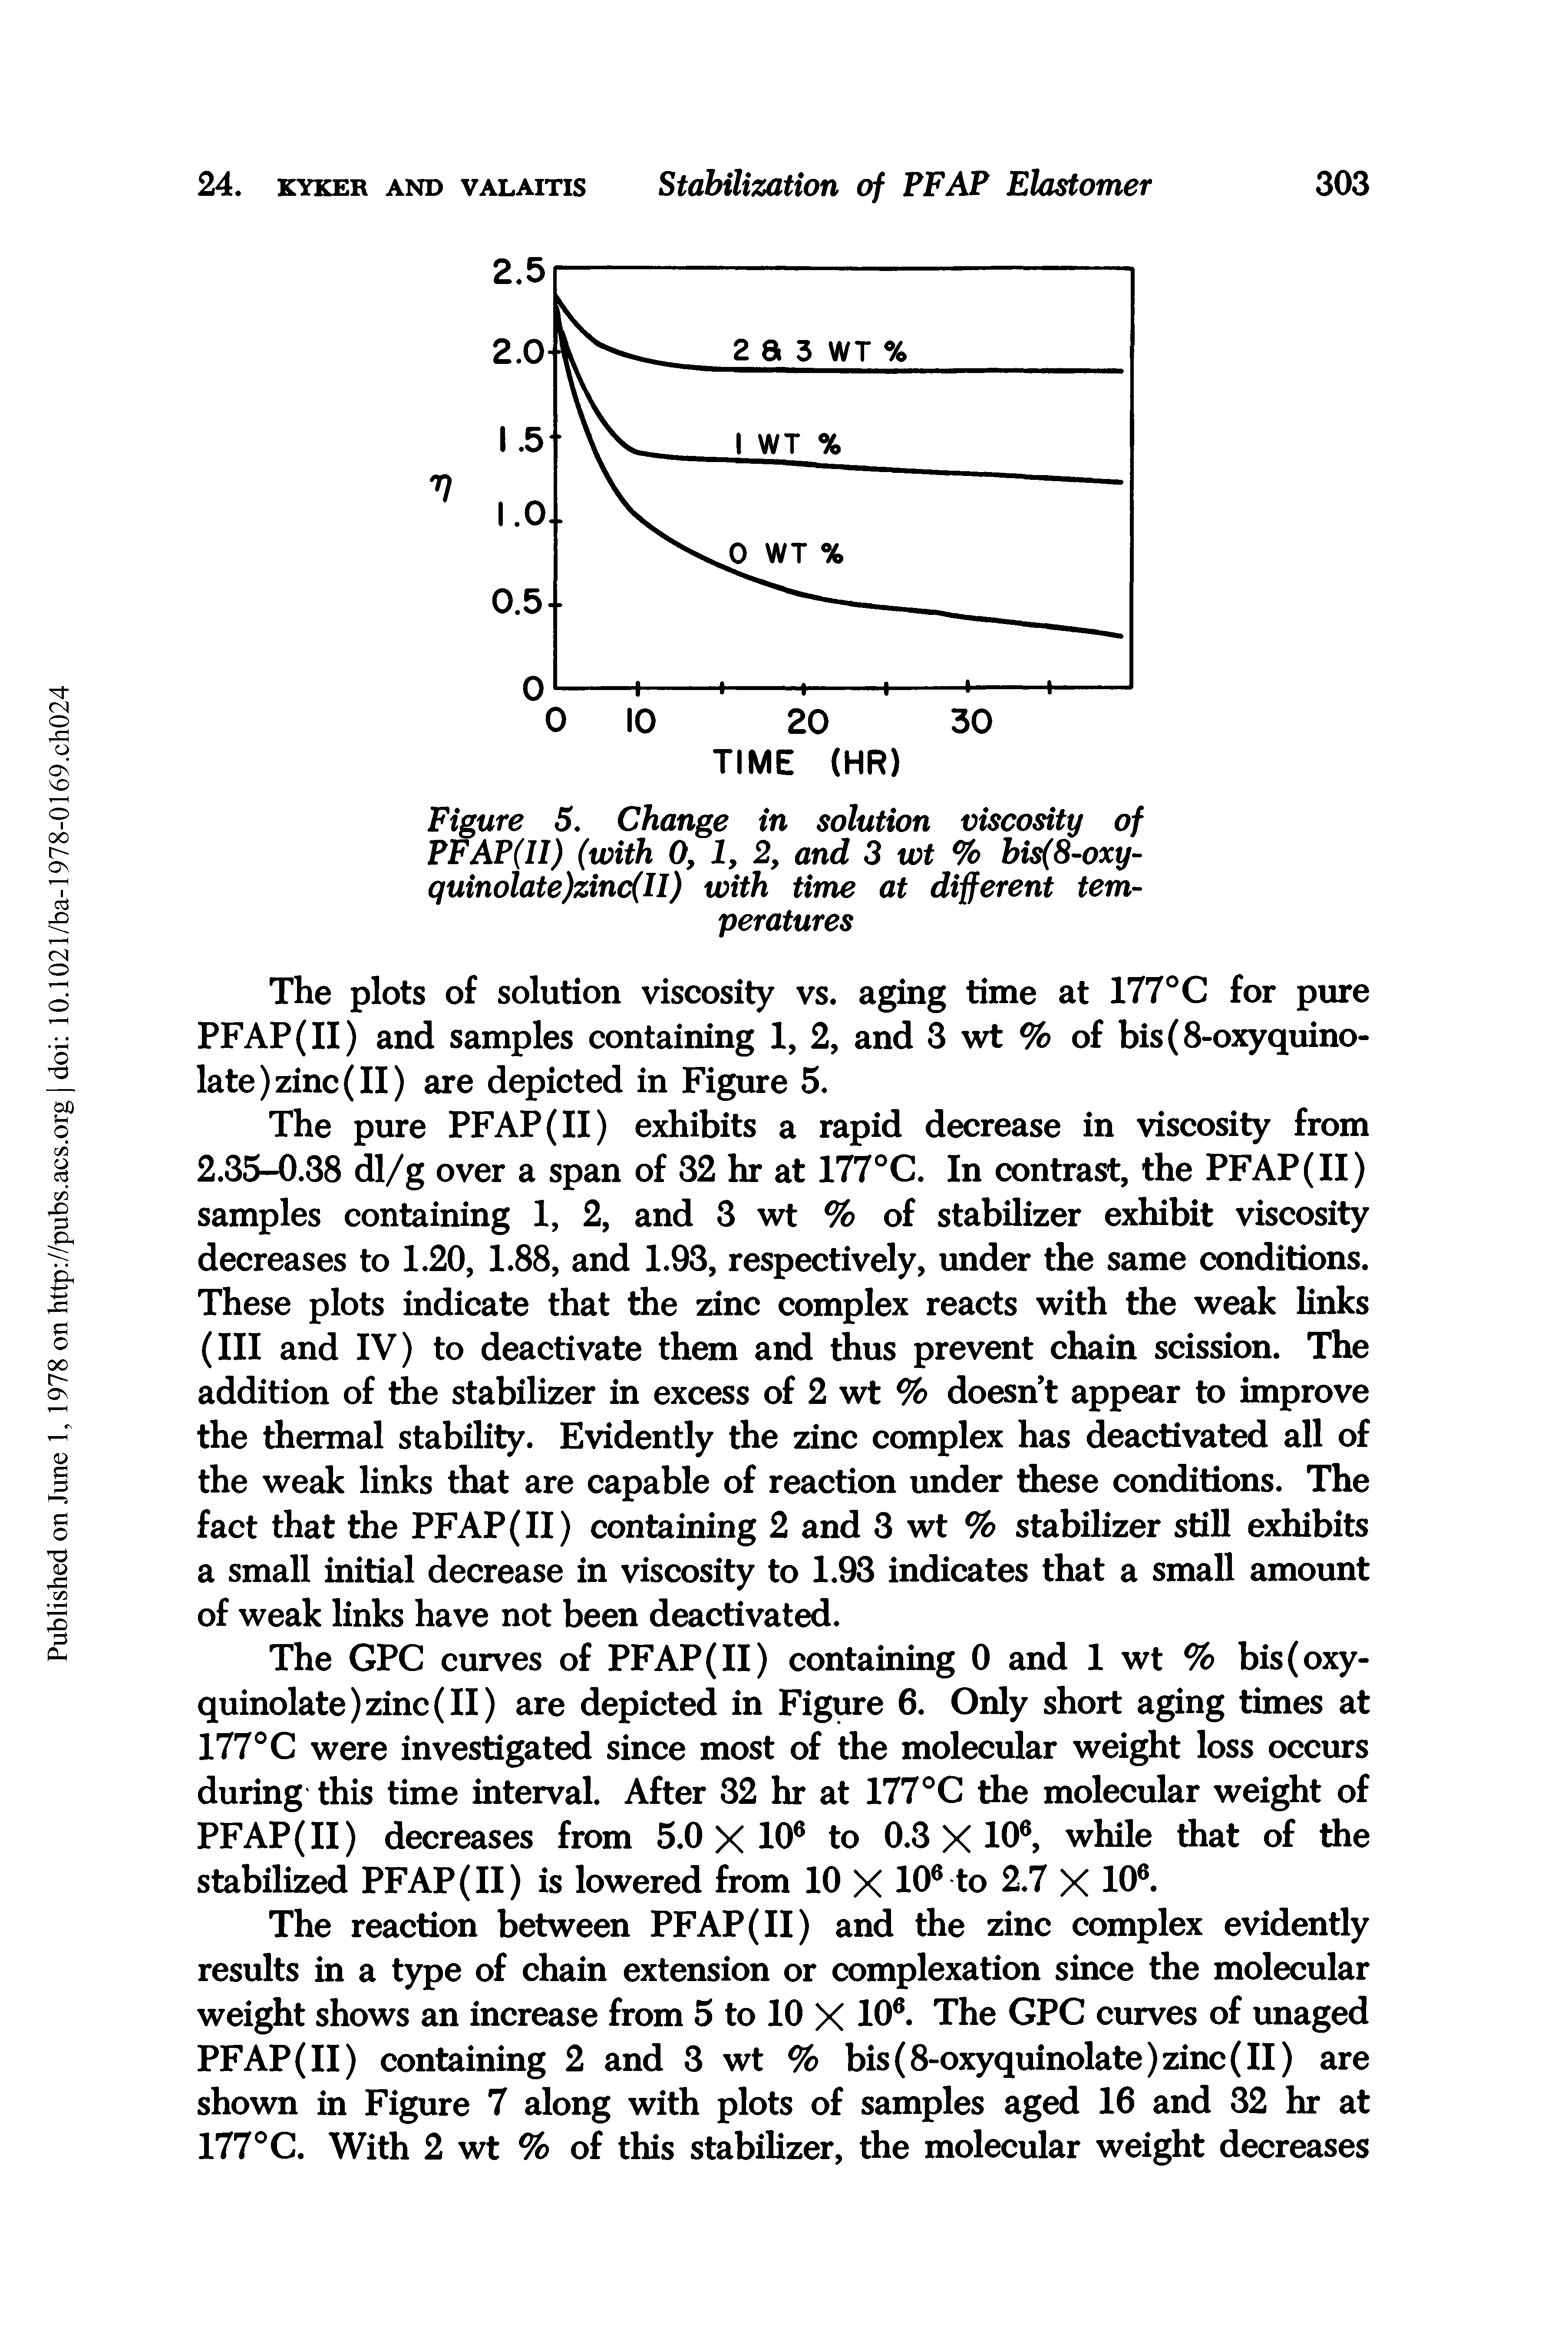 Figure 5. Change in solution viscosity of PFAP(II) (with 0, 1, 2, and 3 wt % bis(8-oxy-quinolate)zinc(II) with time at different temperatures...